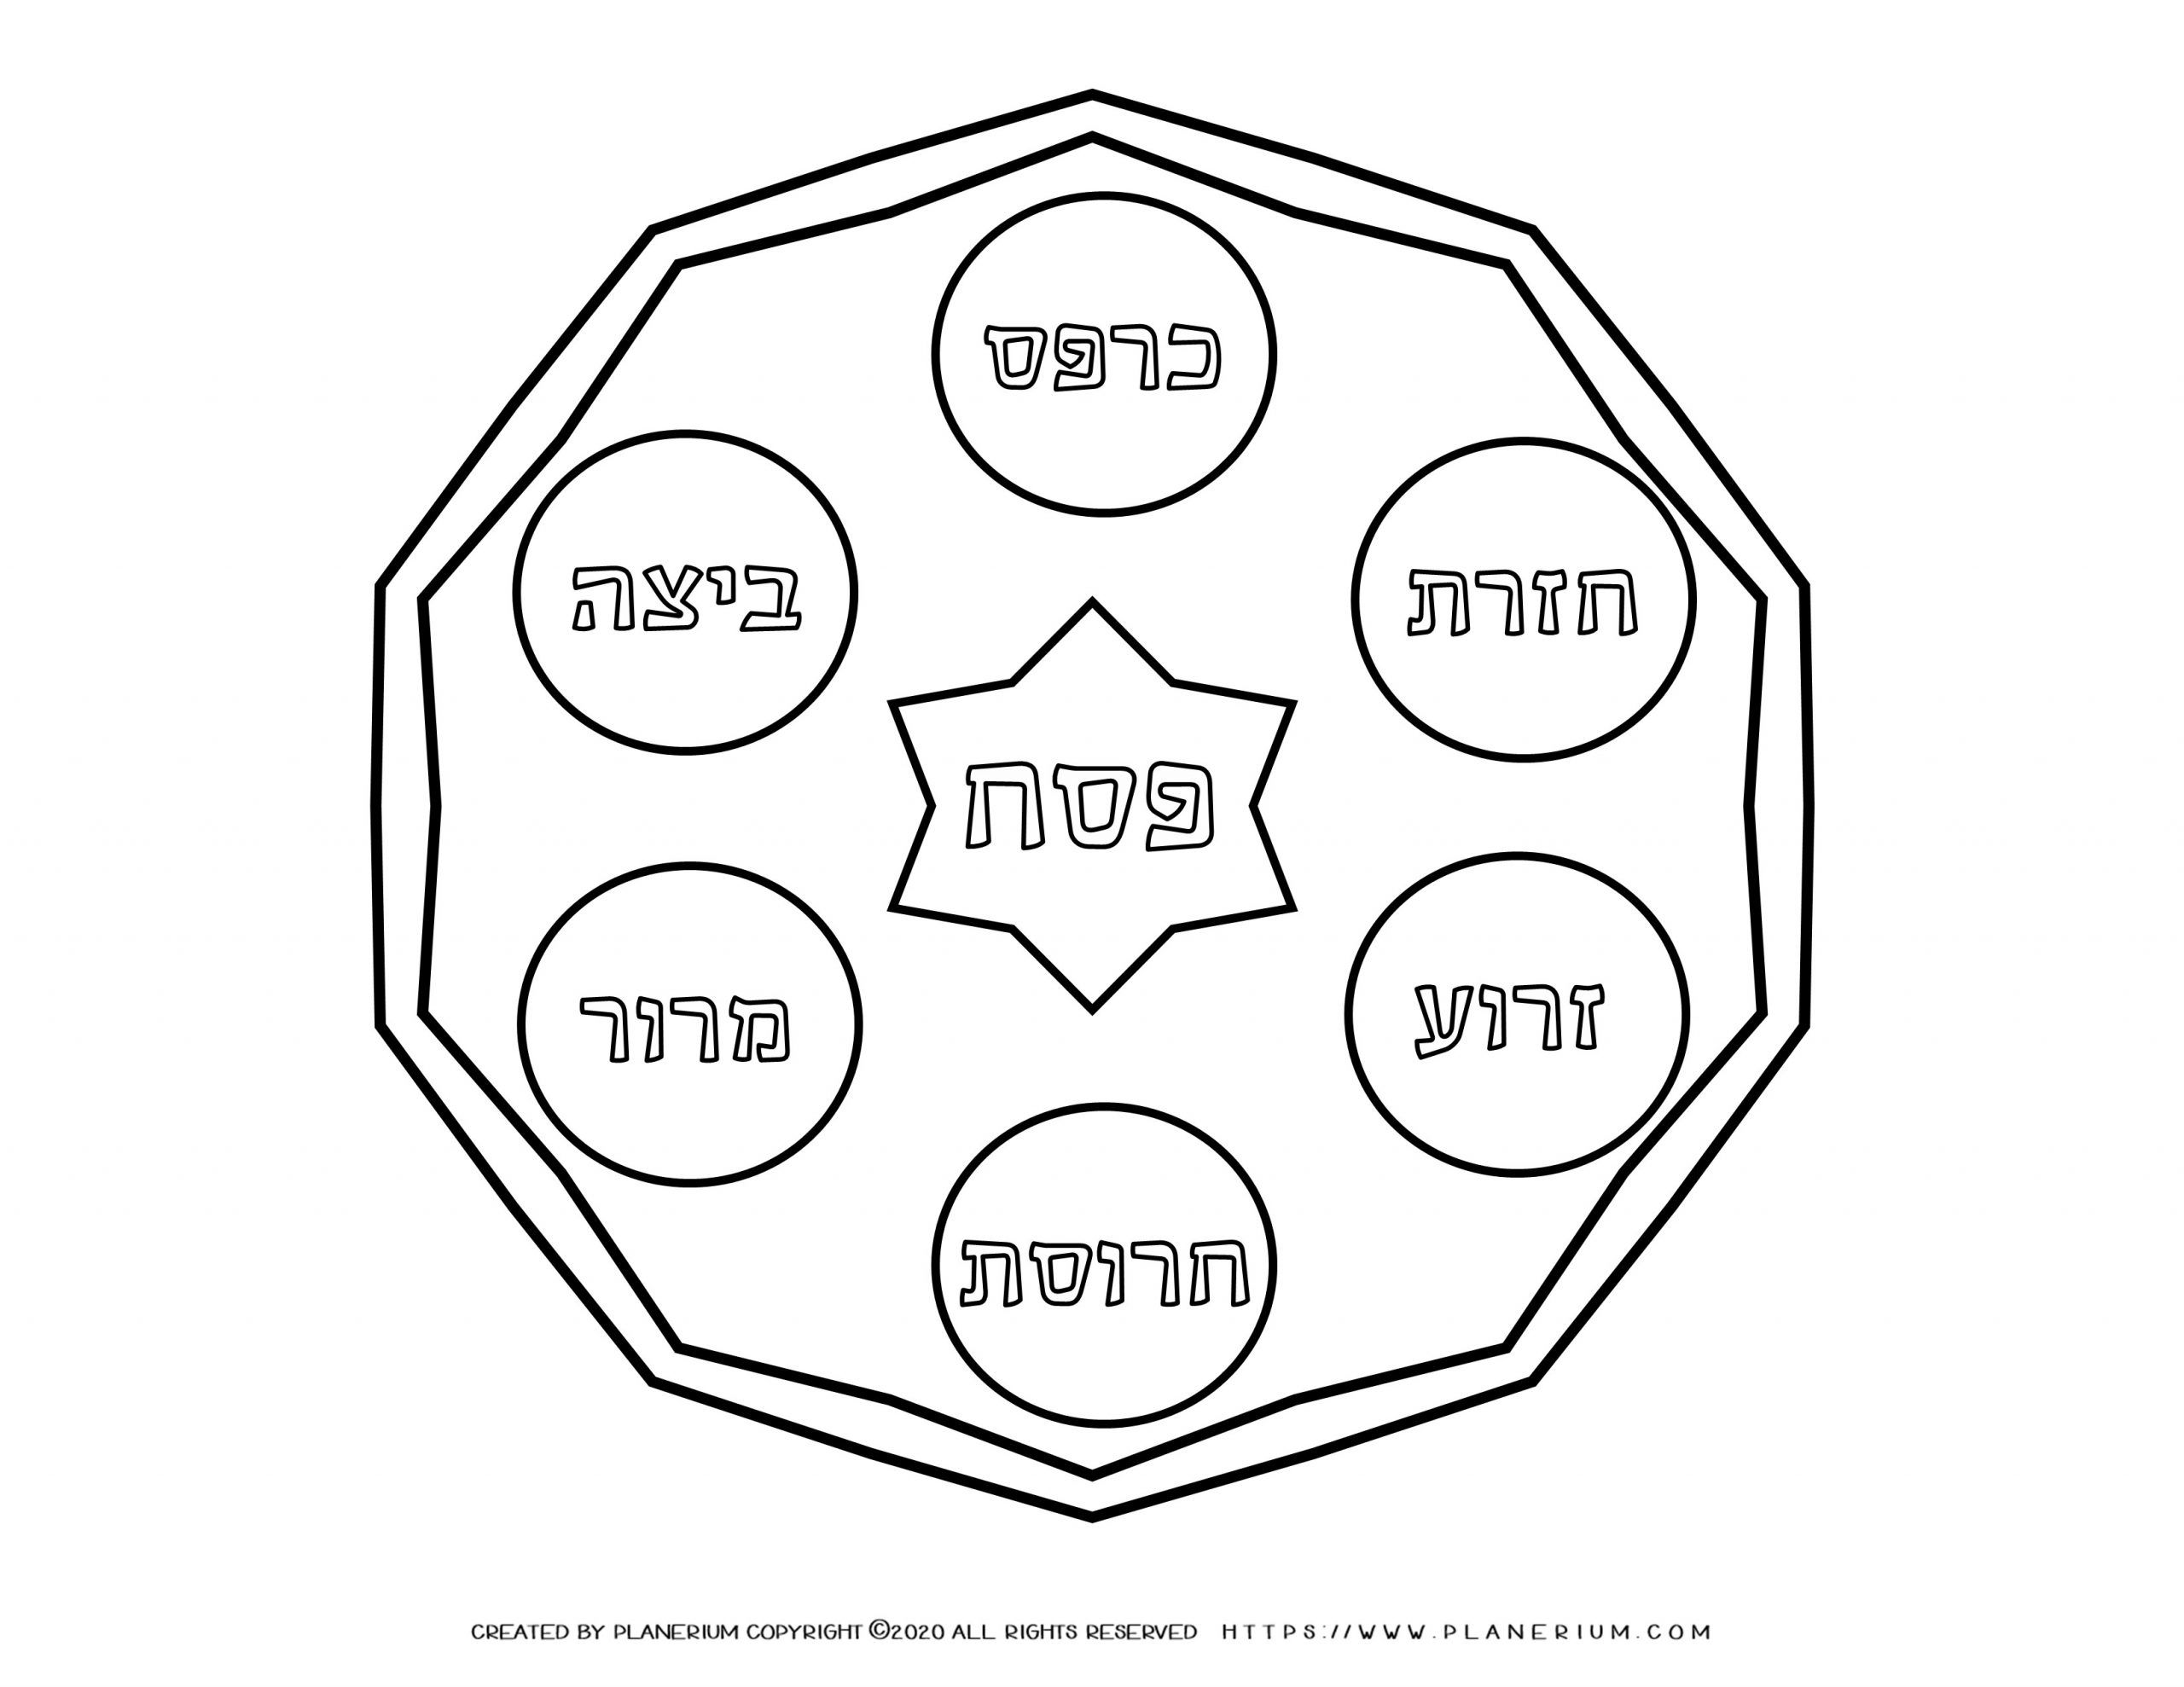 Passover - Coloring Page - Seder Plate in Hebrew | Planerium